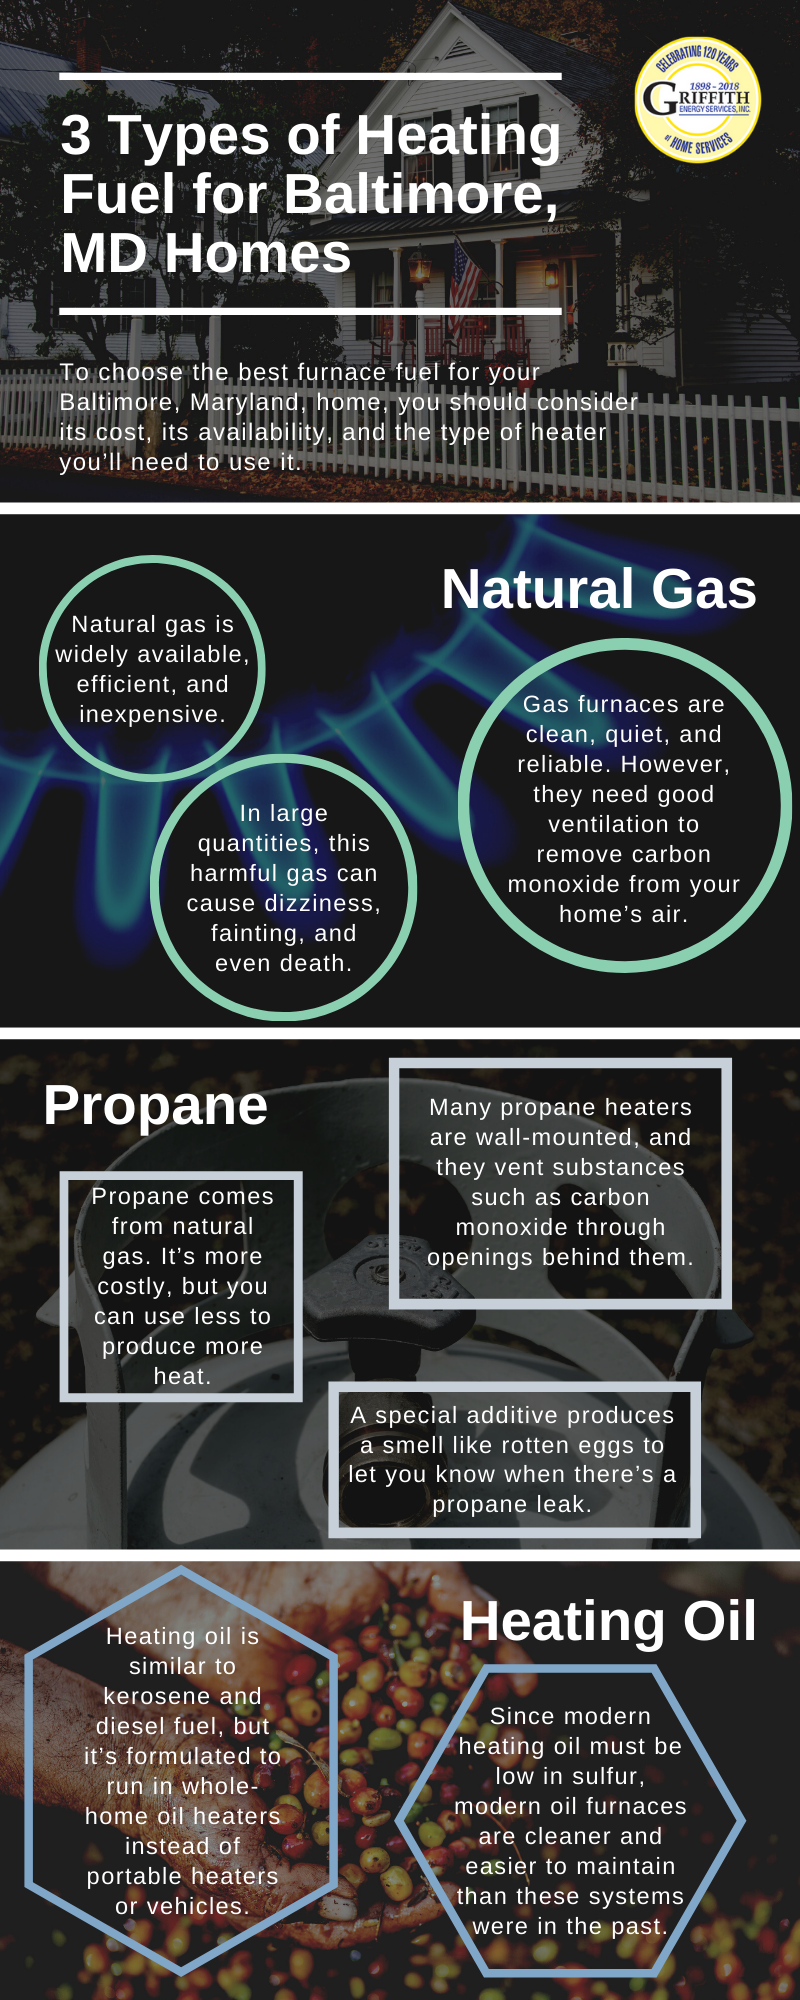 3 Types of Heating Fuel for Baltimore, MD Homes